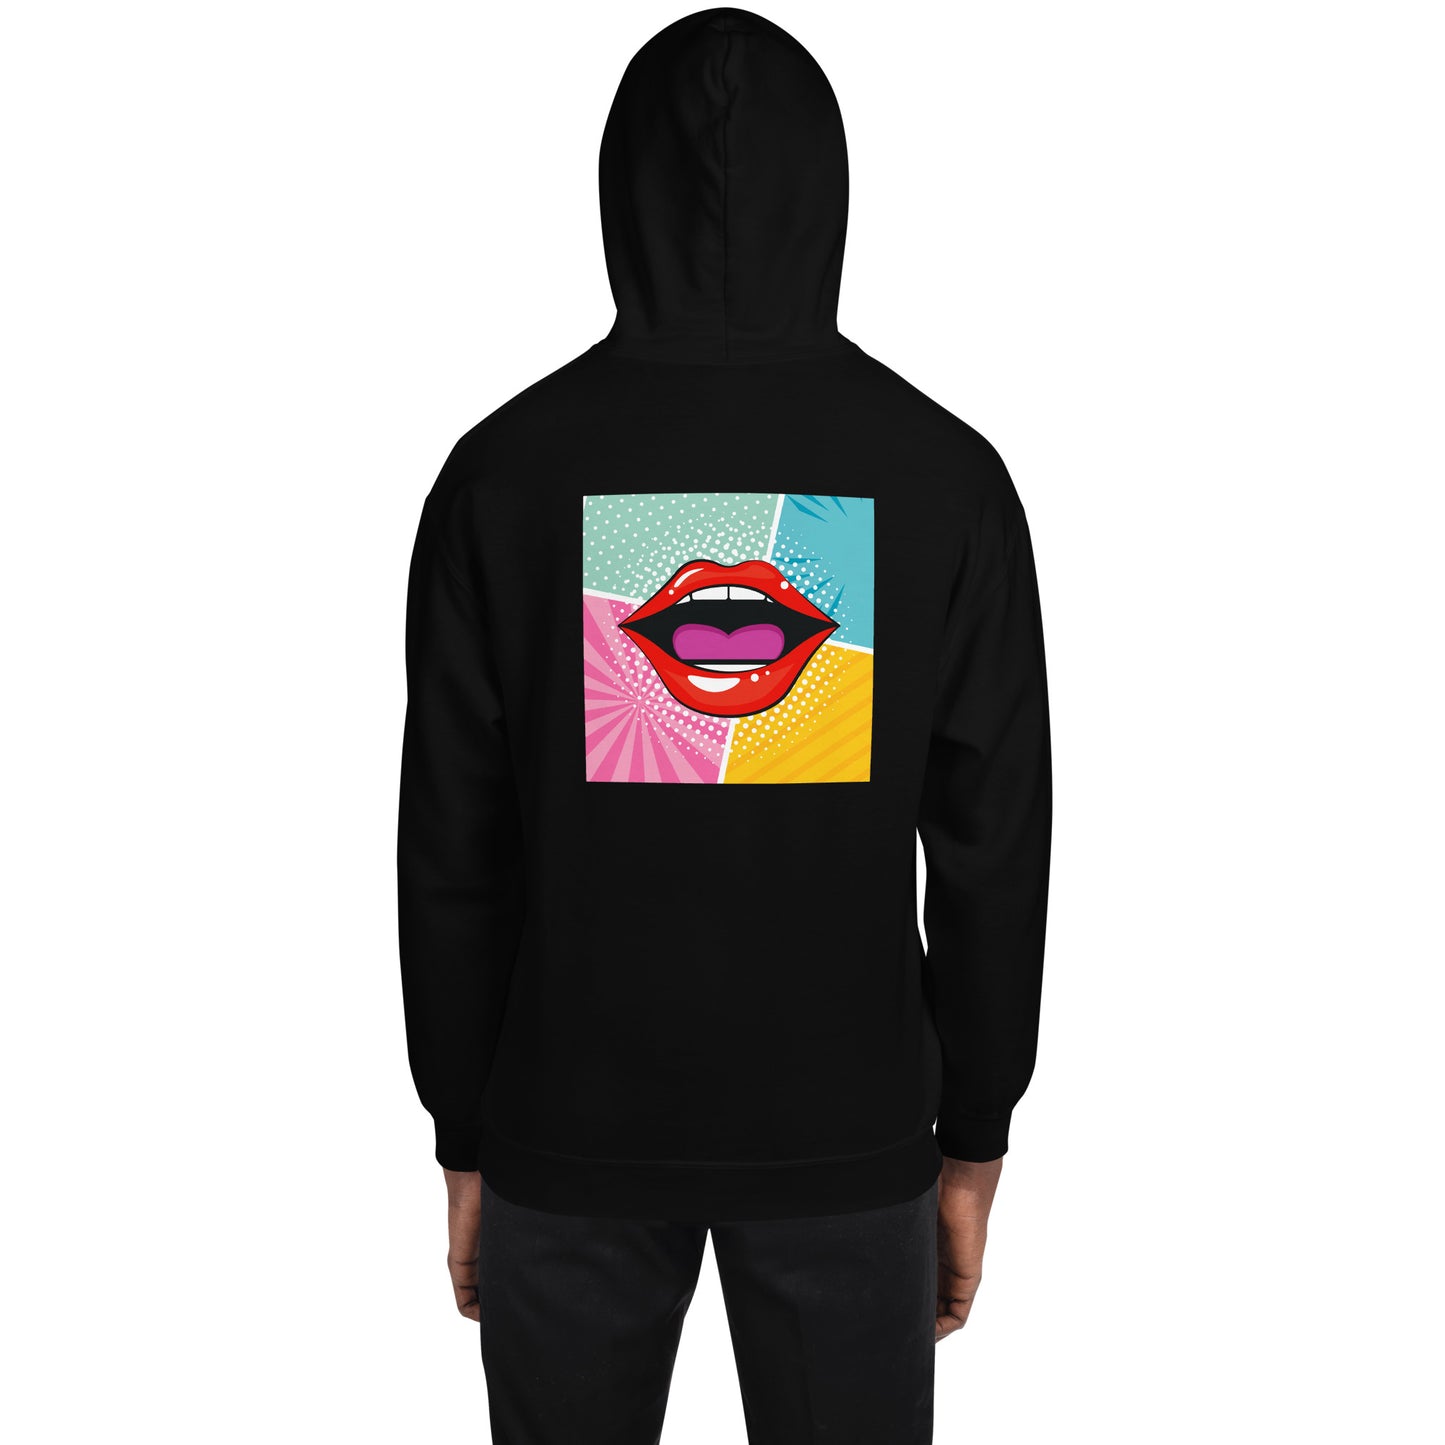 Unisex Hoodie with Mouth/Lips Pop art design (sourced Vecteezy.com)